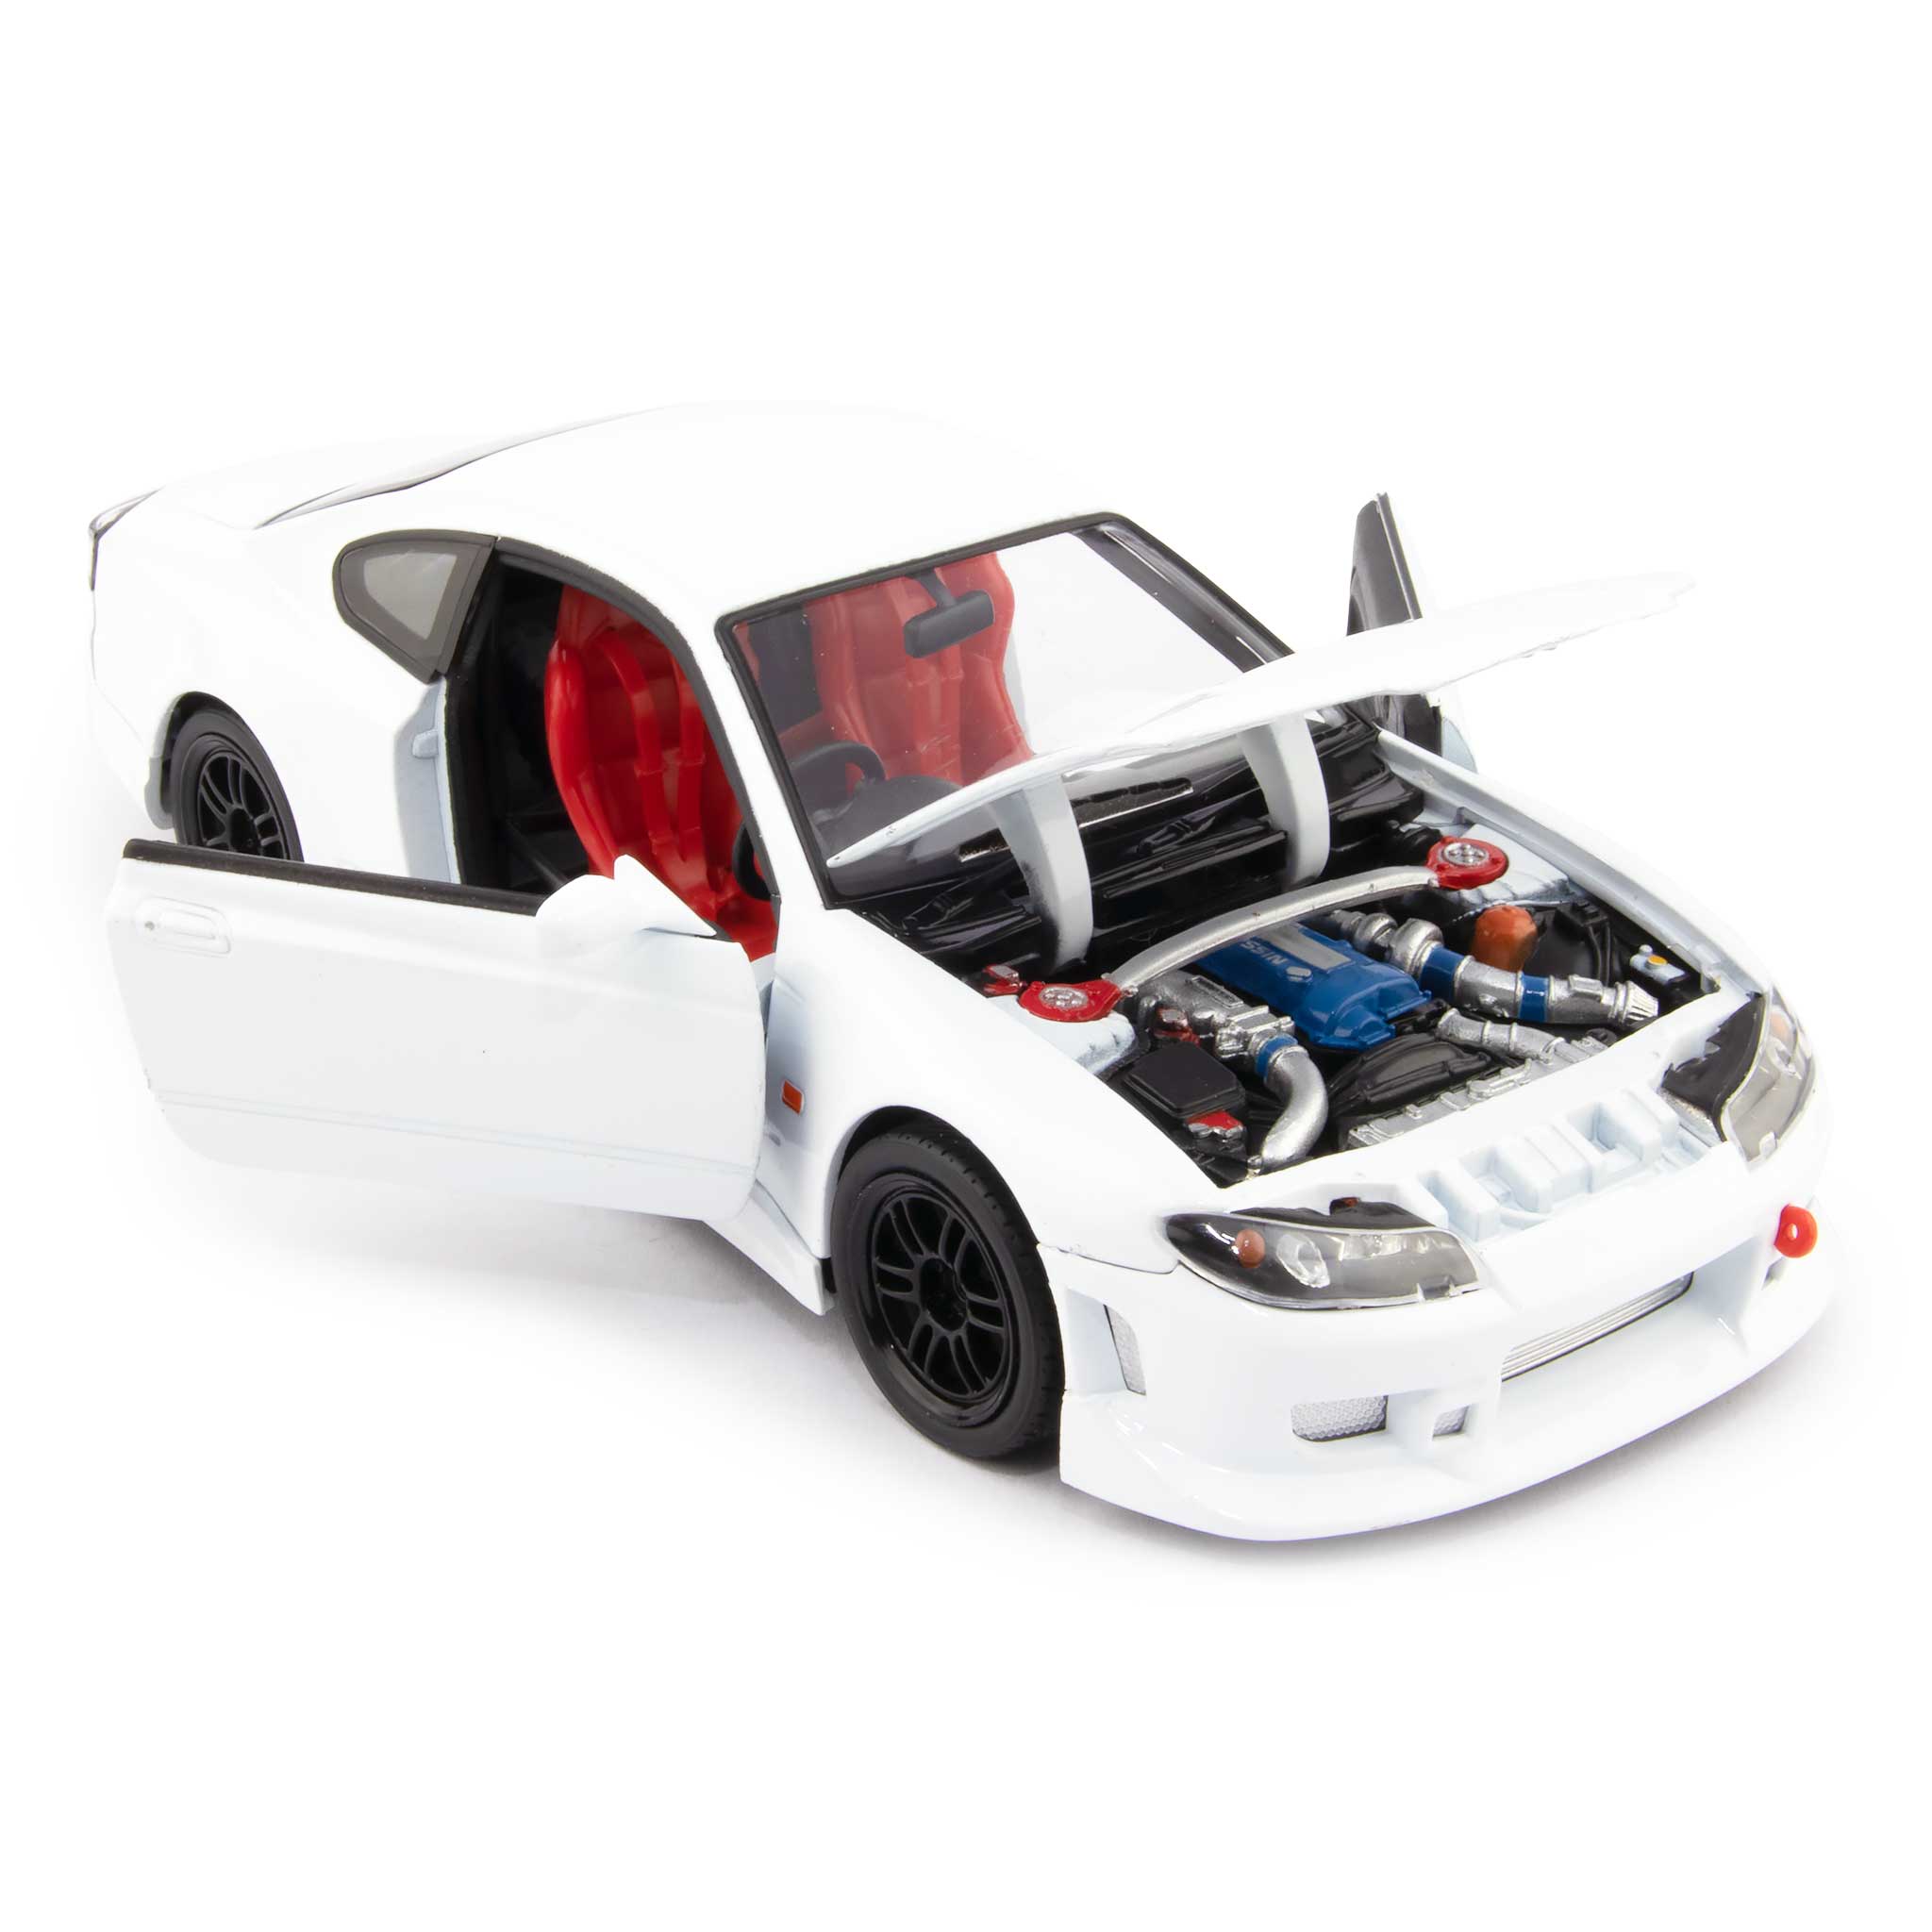 Nissan Silvia S-15 RS-R Diecast Model Car white - 1:24 Scale-Welly-Diecast Model Centre